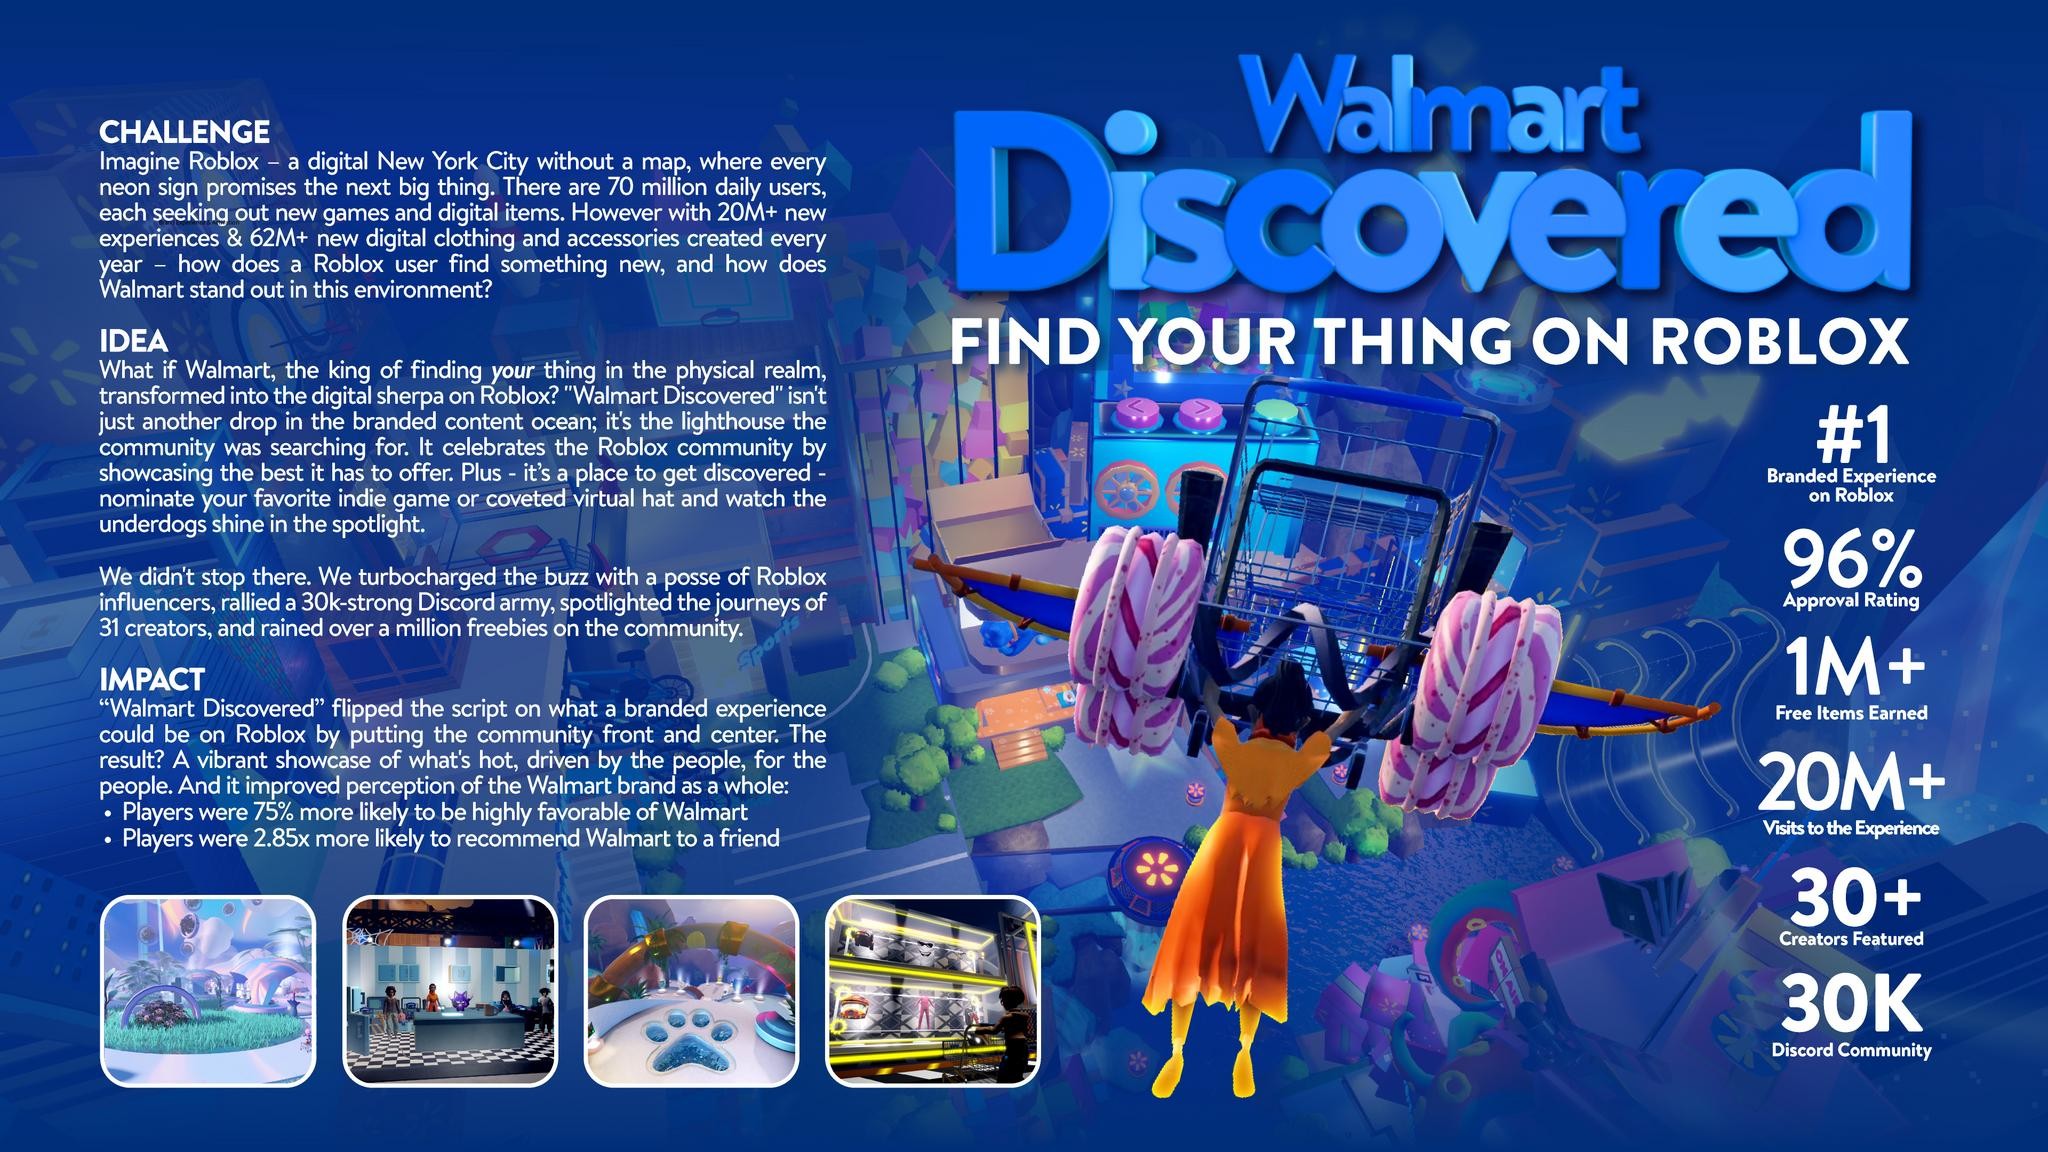 Walmart Discovered on Roblox